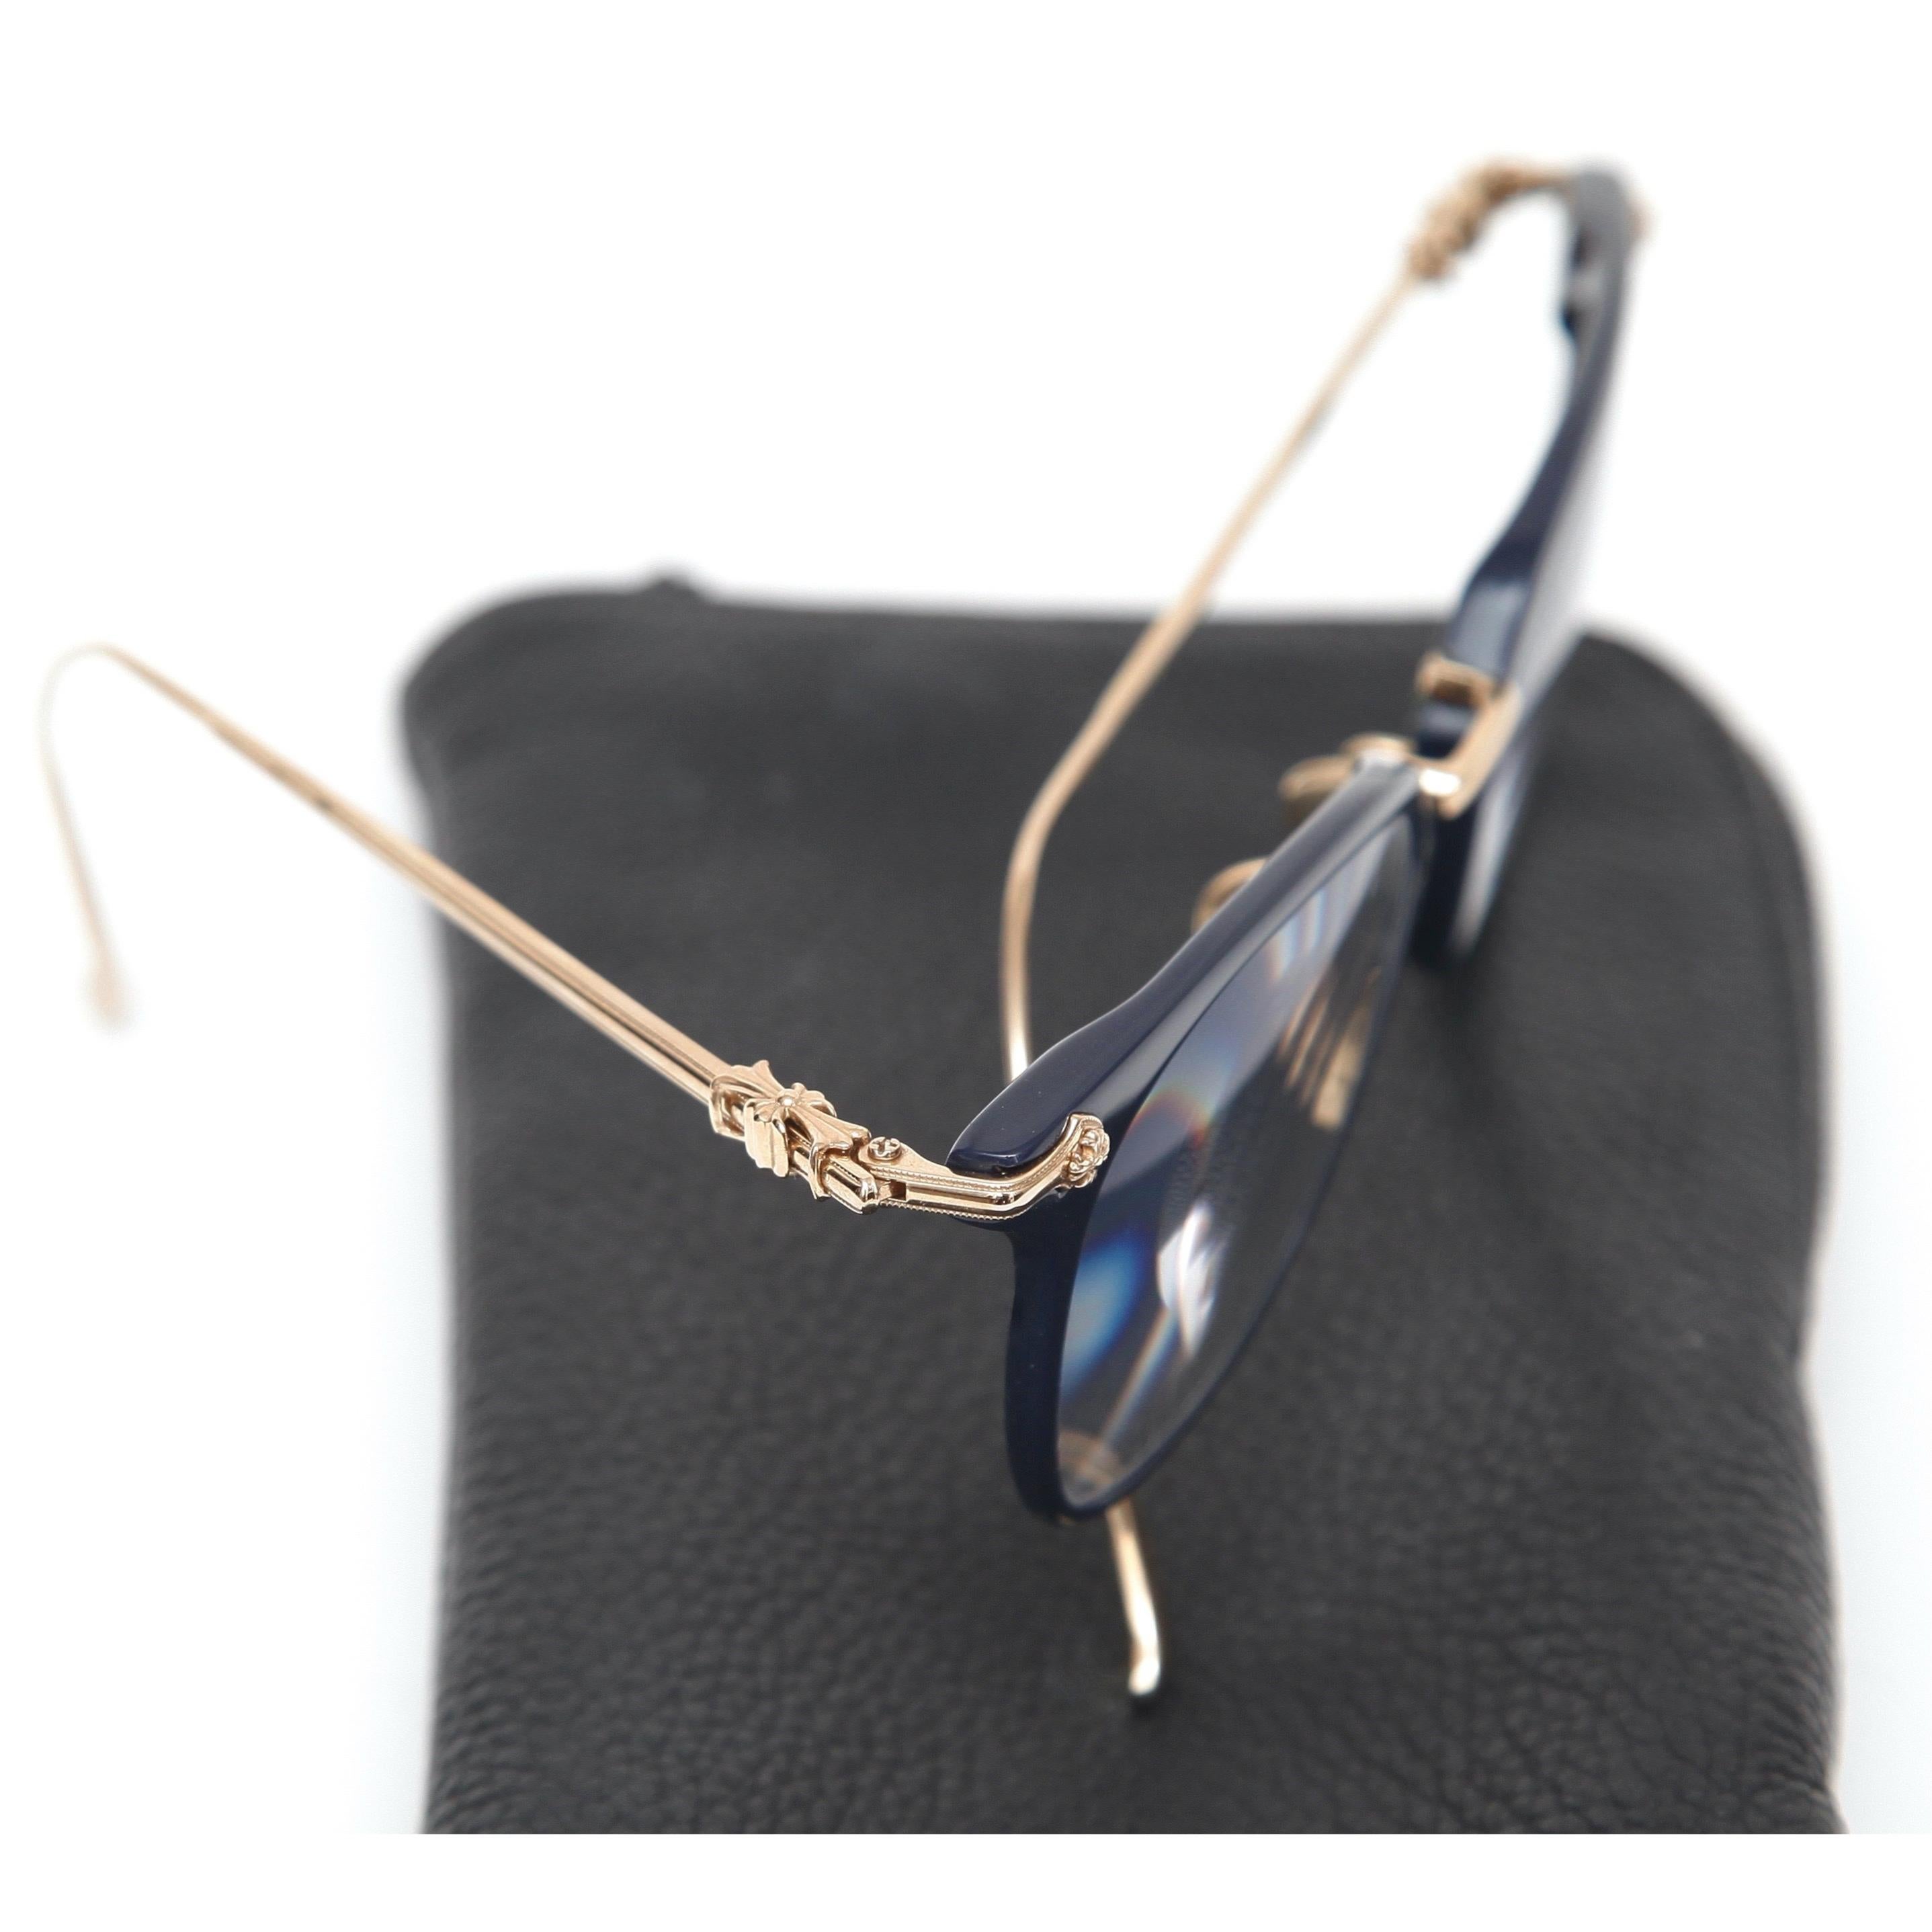 GUARANTEED AUTHENTIC CHROME HEARTS BLUE SHAGASS FRAME EYEGLASSES

Details: 
- Shiny navy blue acetate frames.
- Gold metal arms.
- Signature hardware at temples.
- Lens width: 51 mm.
- Bridge: 21 mm.
- Arm: 145 mm.
- Comes with Chrome Hearts soft